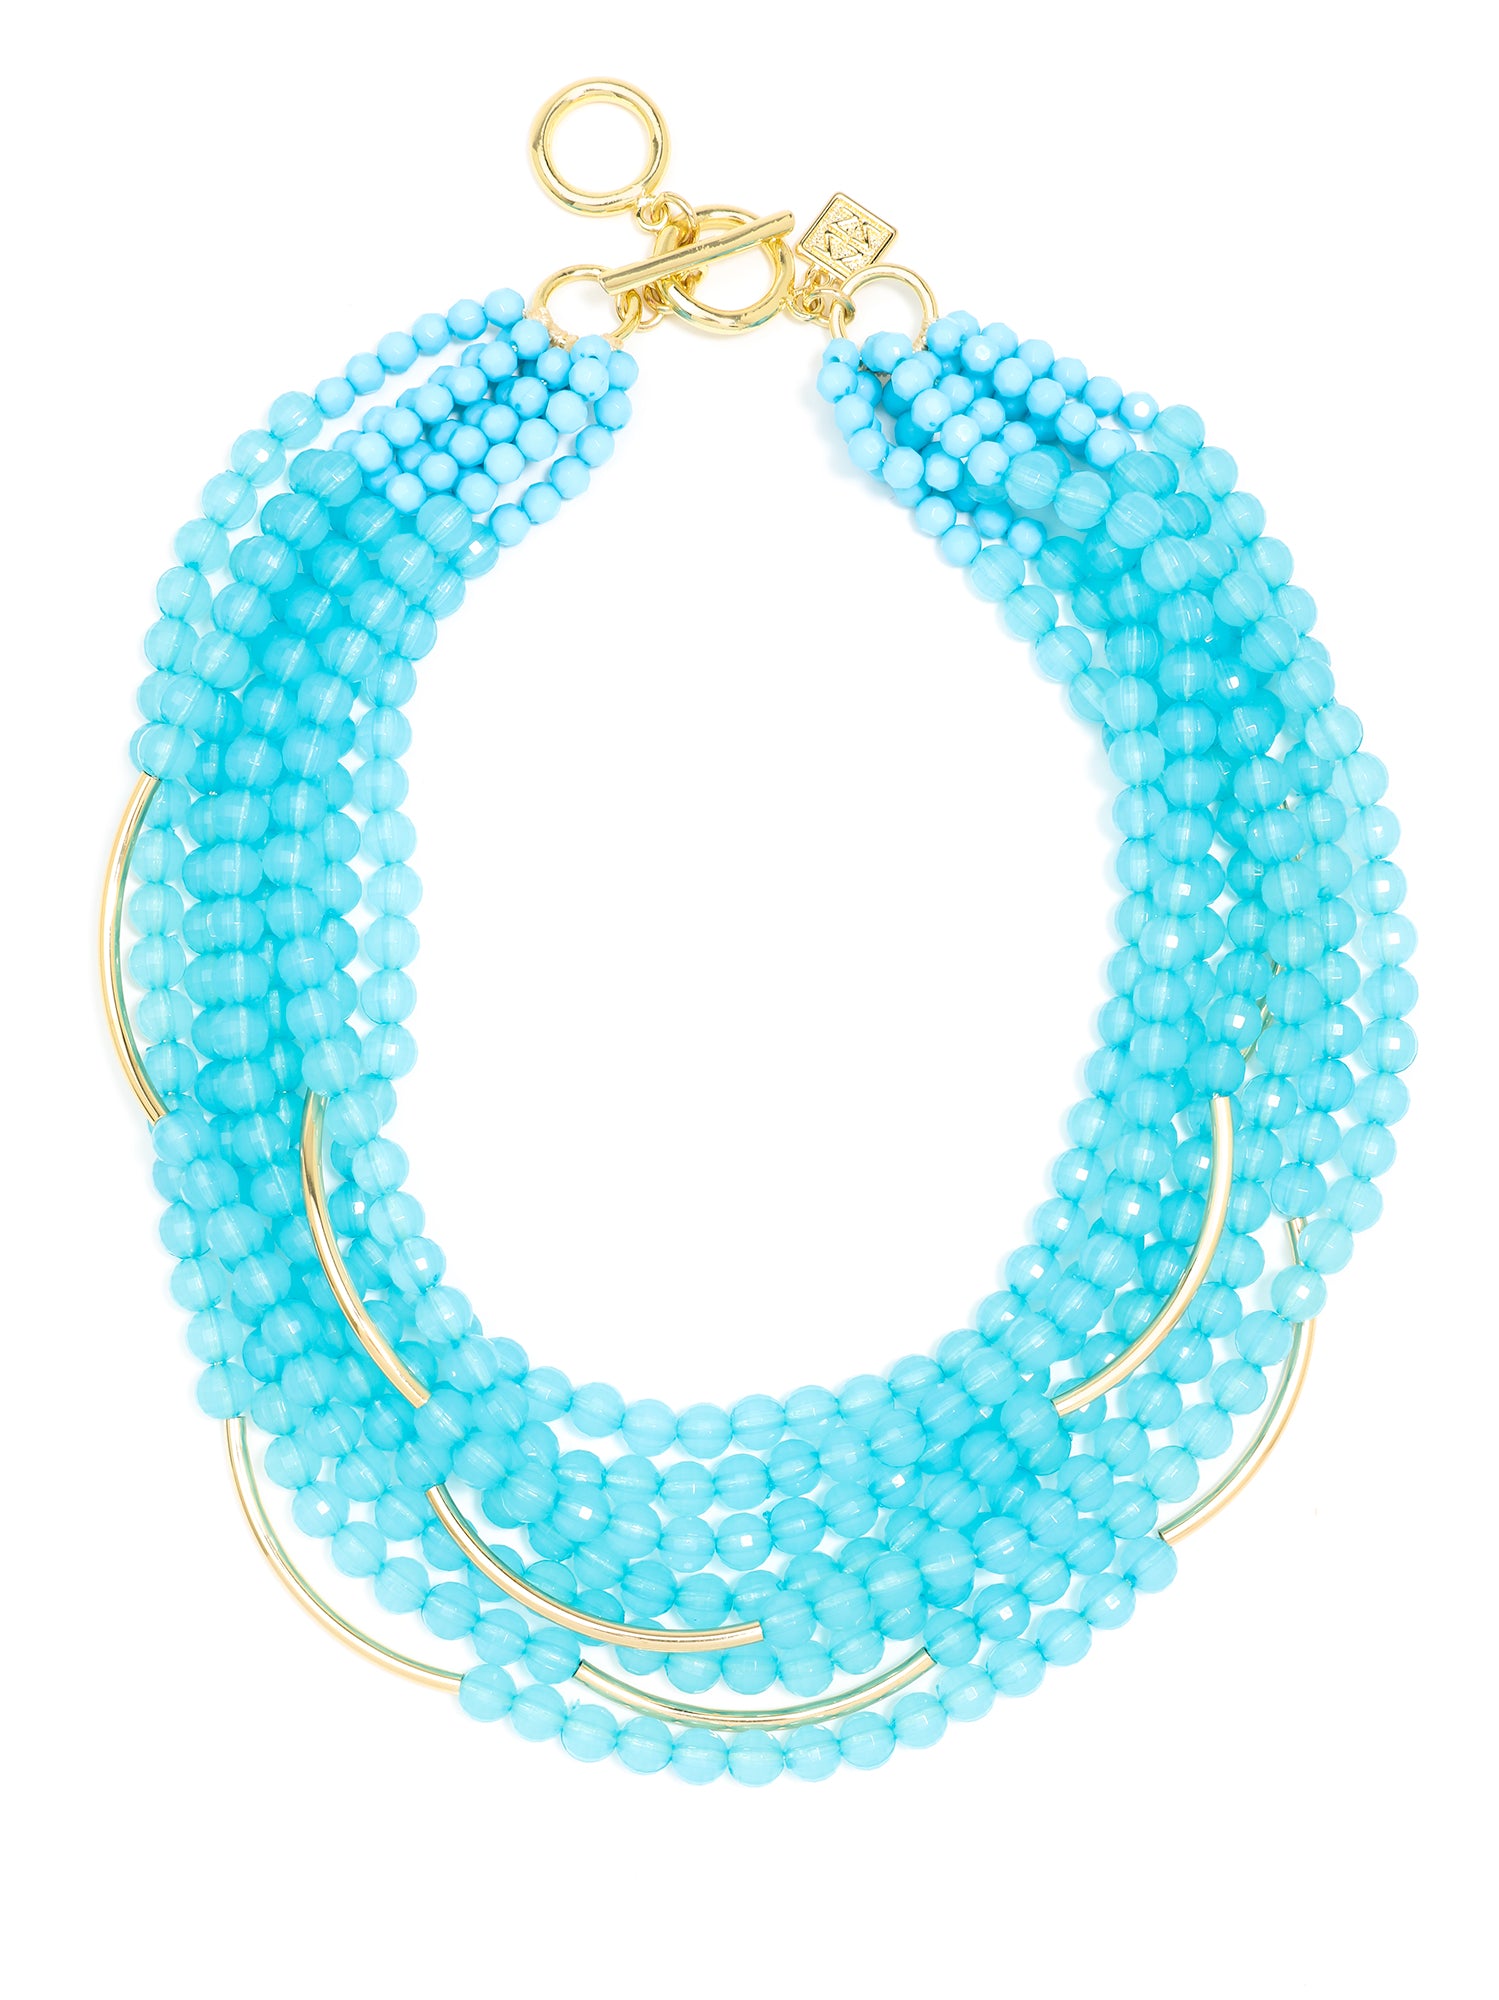 Catch The Wave Beaded Necklace